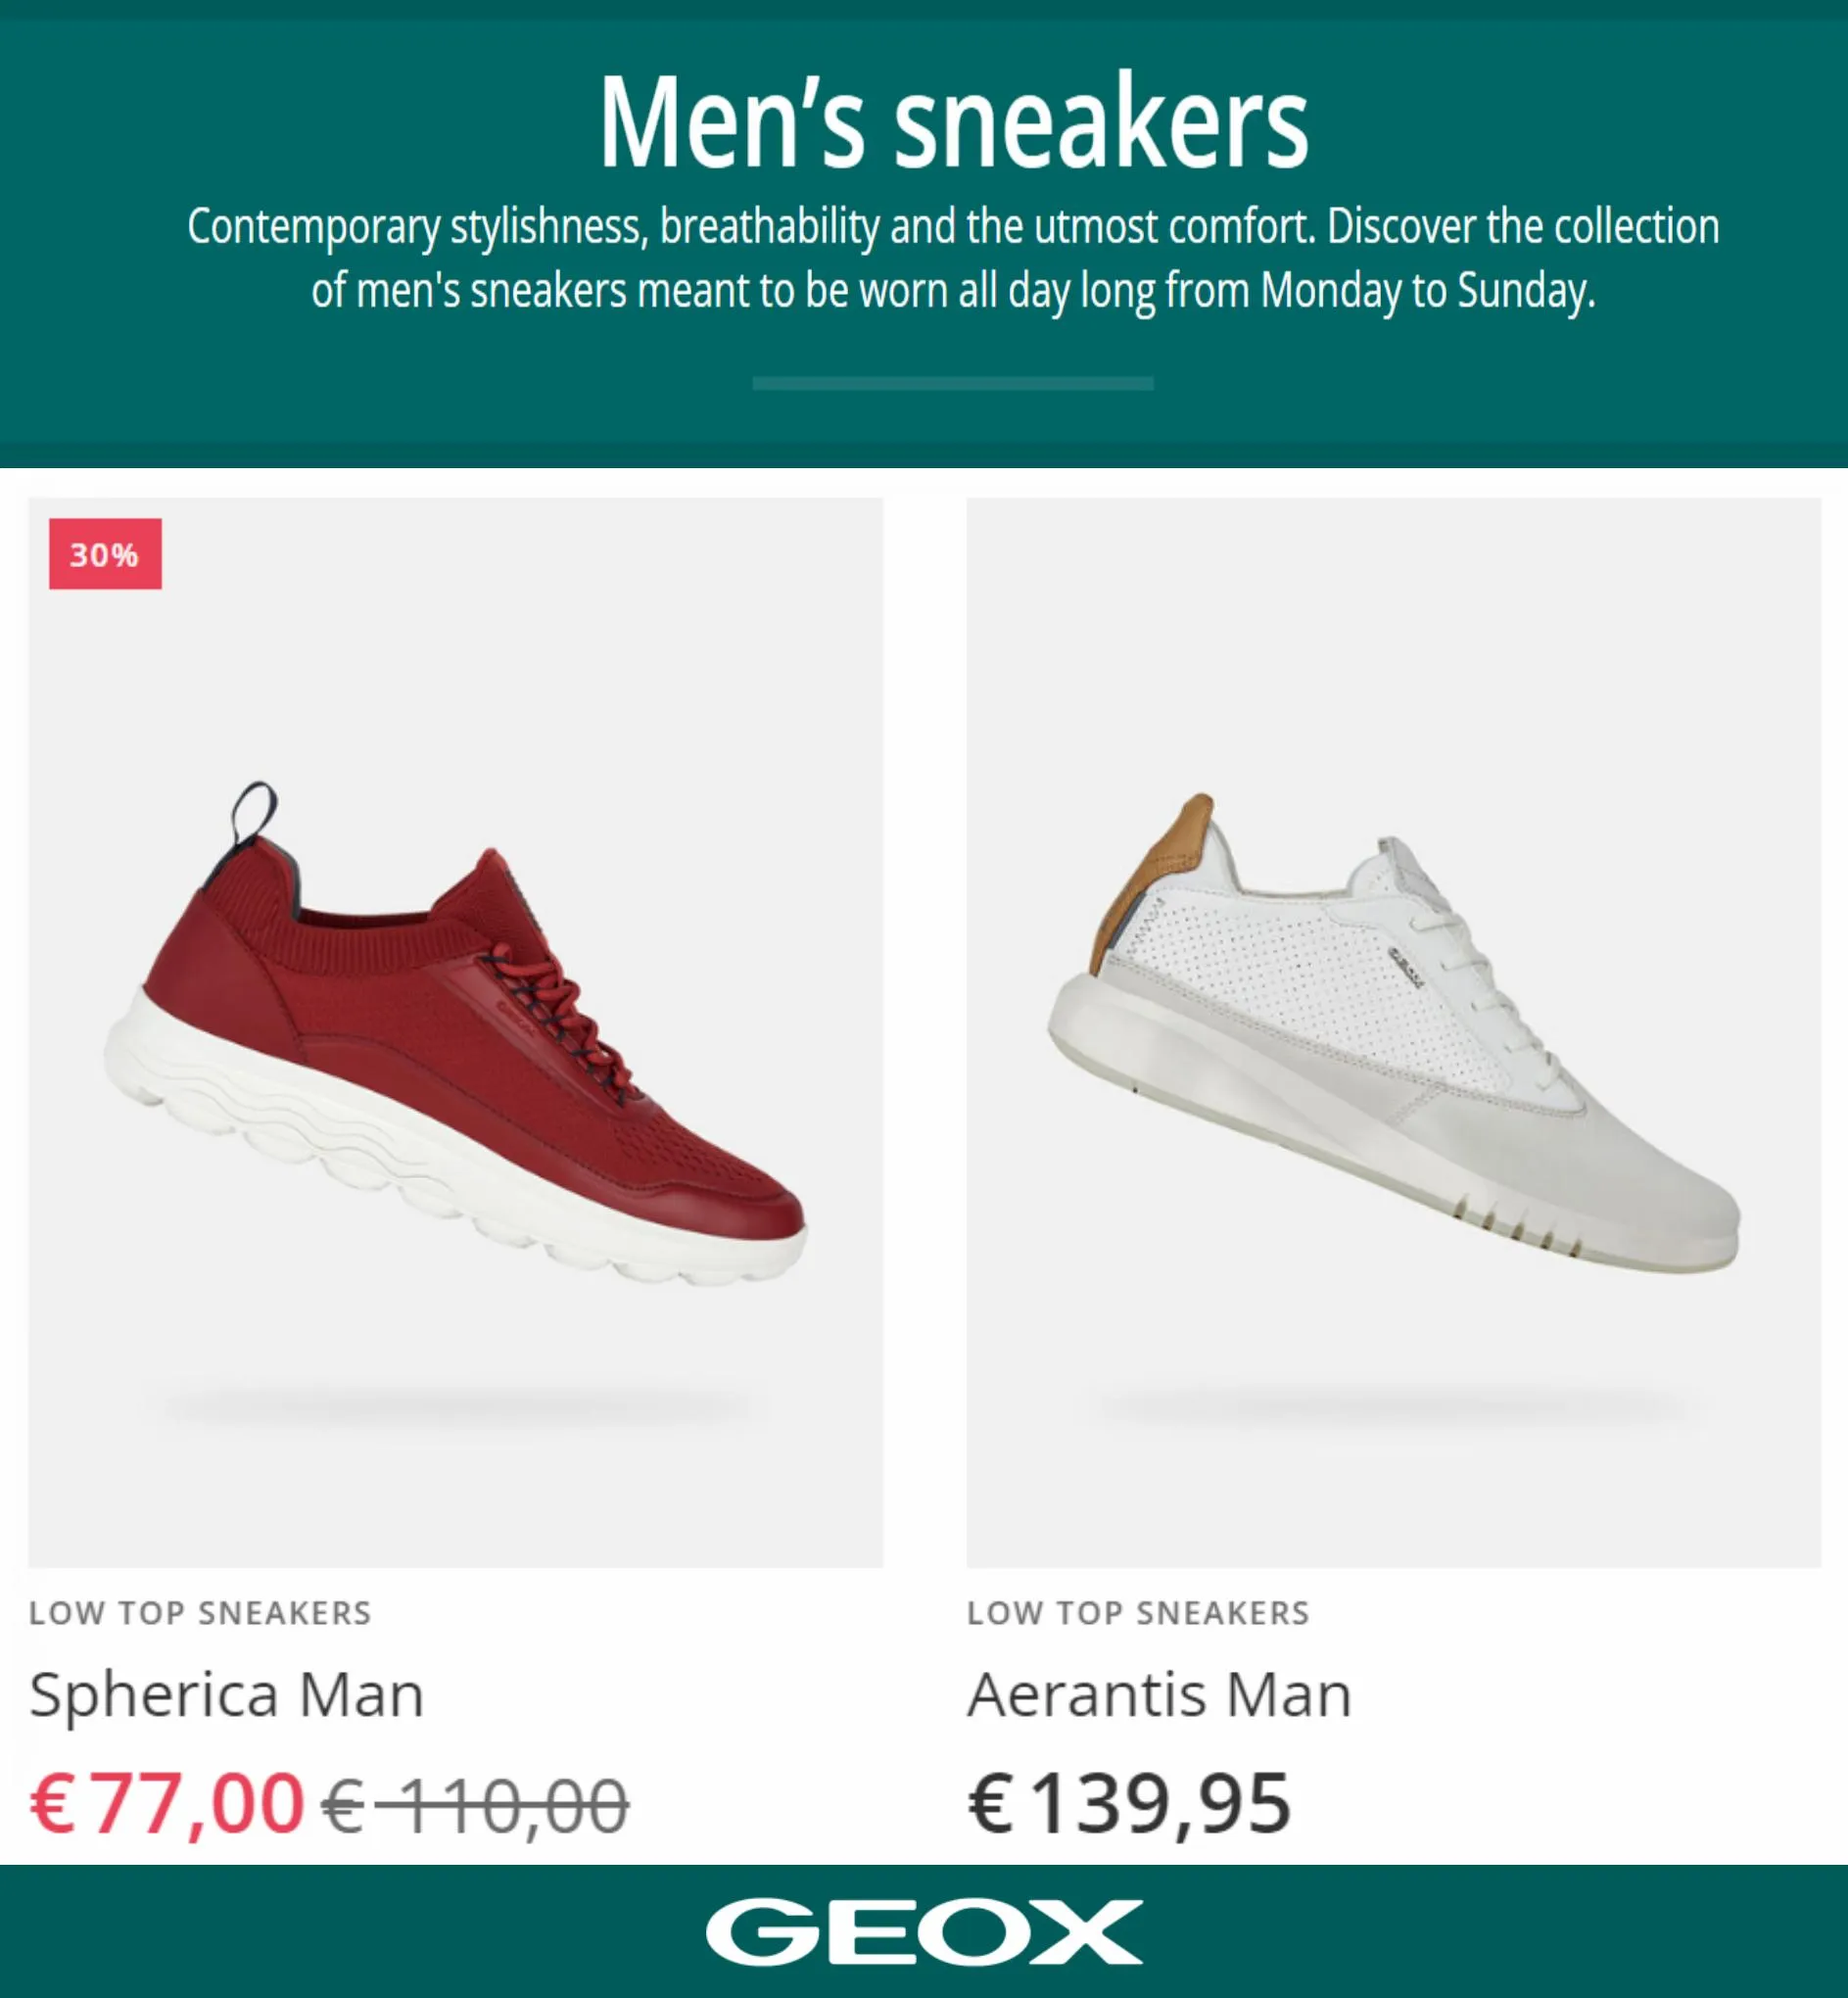 Catalogue Men's Sneakers, page 00003